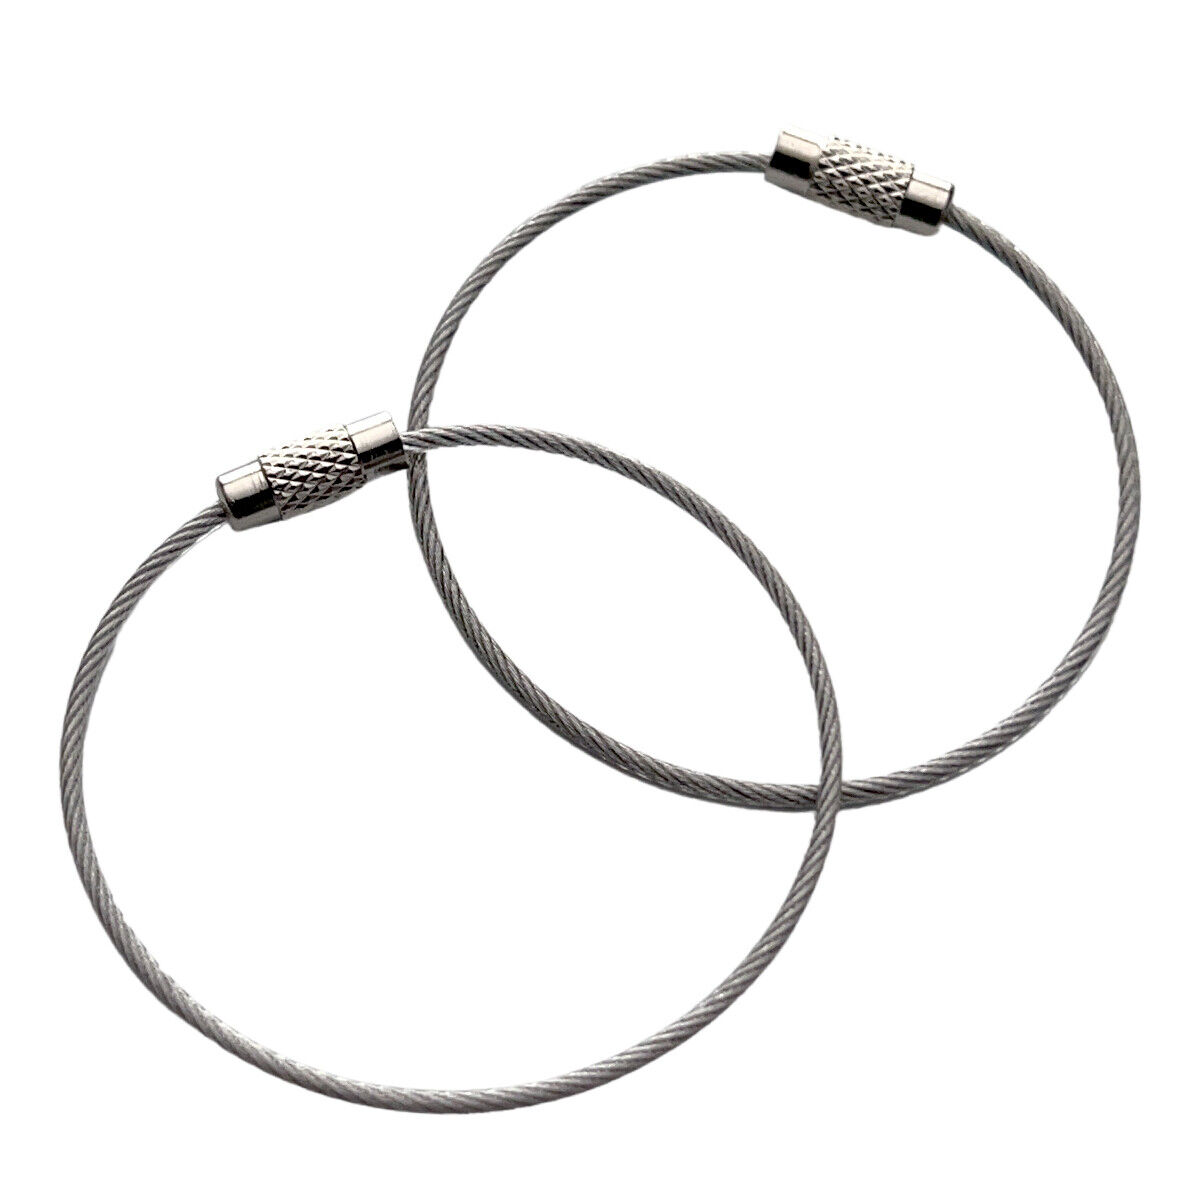 5 Pack - Wire Luggage Loops - Stainless Steel 6" Cable Rings for Bag Tags, Keys Specialist ID SPID-8170